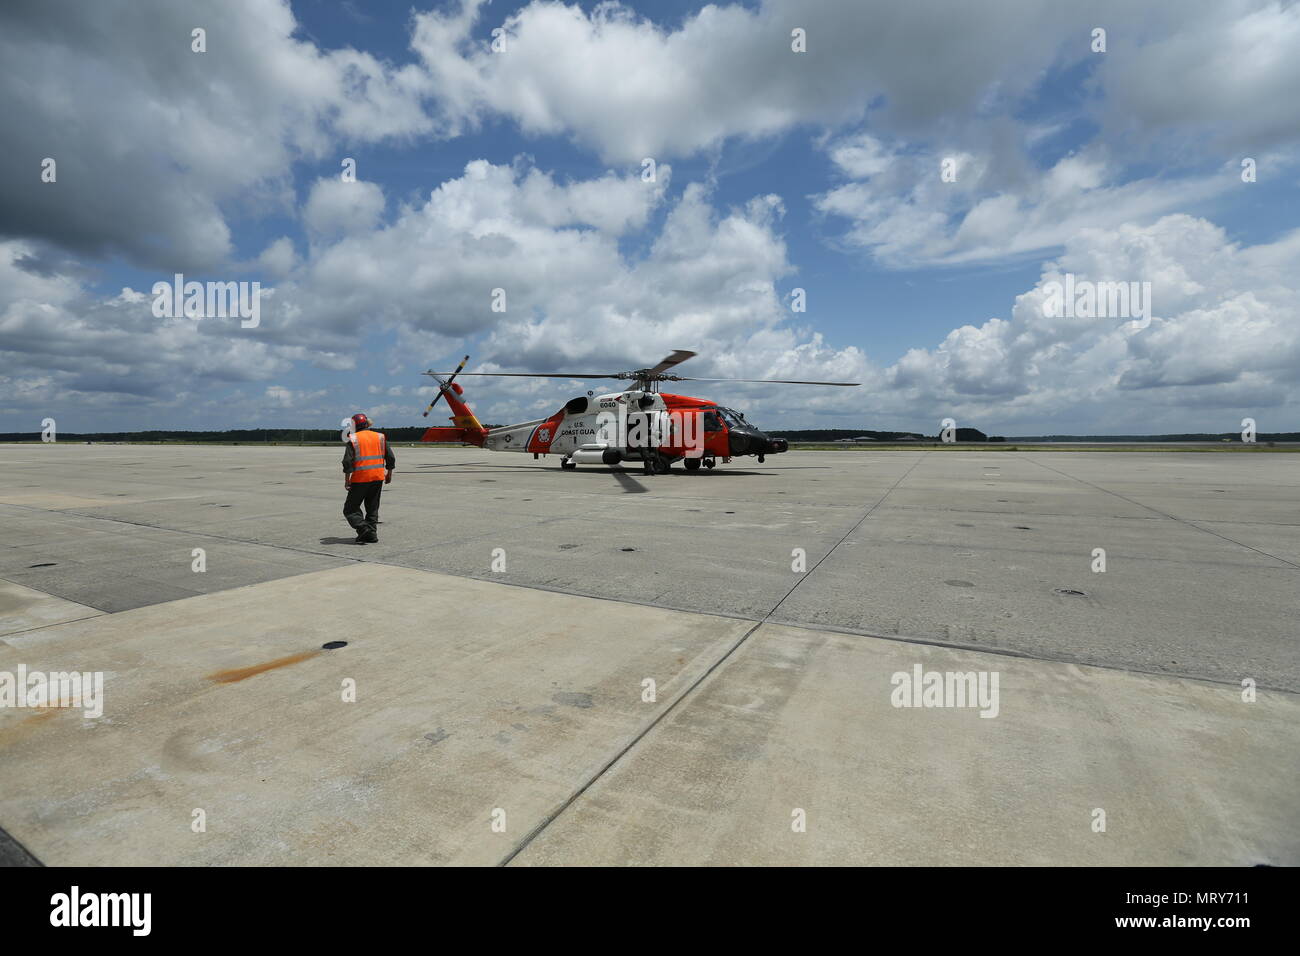 A U.S. Coast Guard MH-60T Jayhawk lands on the flight line at Marine Corps Air Station Cherry Point, N.C. after the Fifth District Search and Rescue Exercise (SAREX) on July 11, 2017. SAREX was a joint exercise conducted to certify the U.S. Coast Guard's capability to rescue Marine Corps pilots in the event of a downed aircraft. (U.S. Marine Corps photo by Lance Cpl. Jailine L. Martinez) Stock Photo